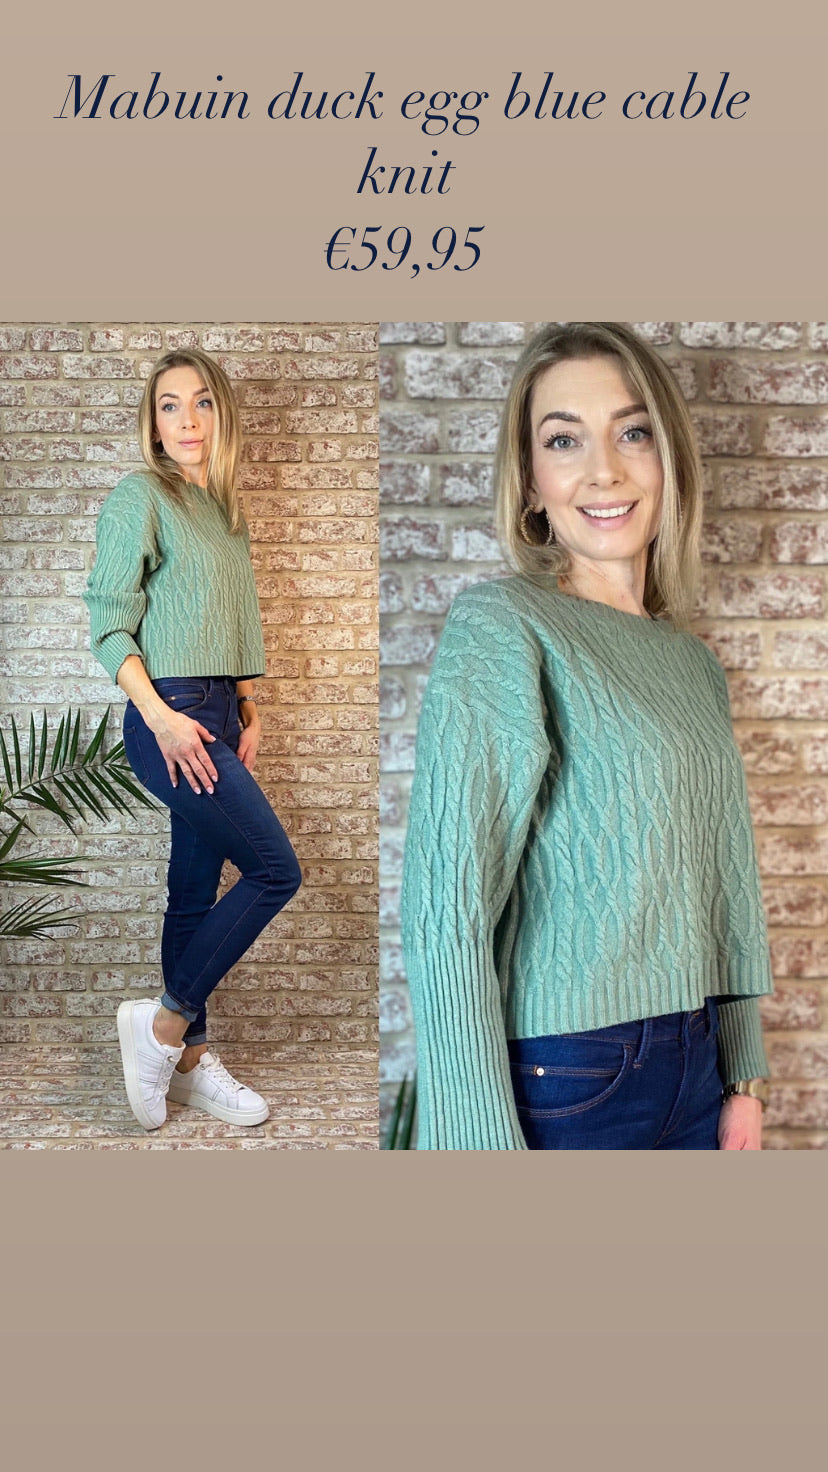 Mabuin duck egg blue cable knit